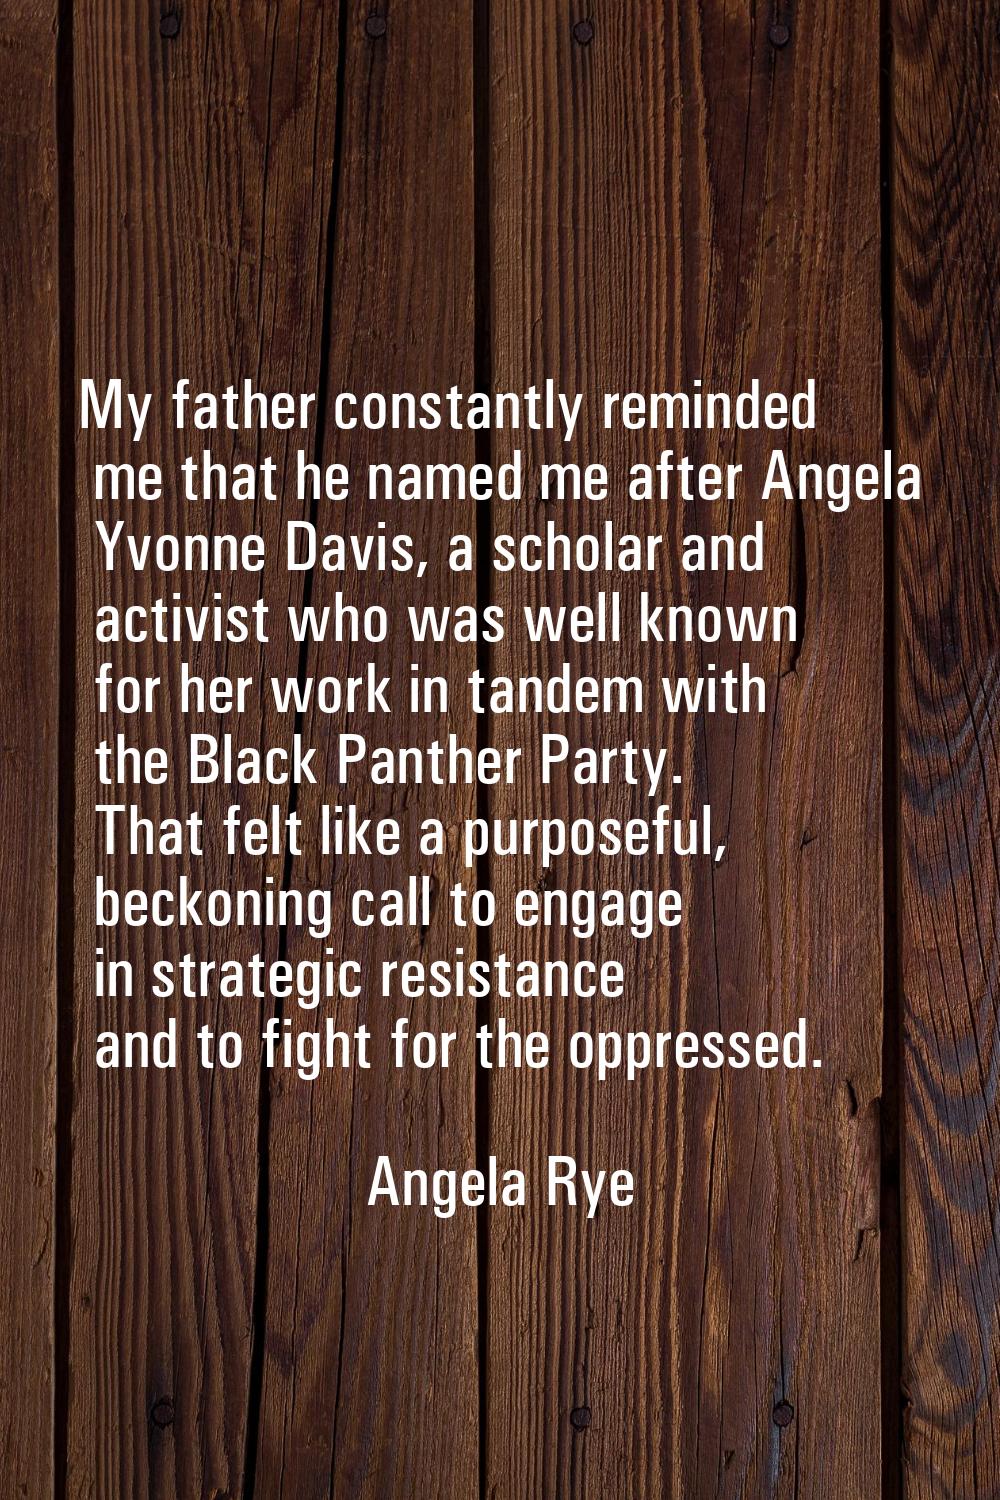 My father constantly reminded me that he named me after Angela Yvonne Davis, a scholar and activist